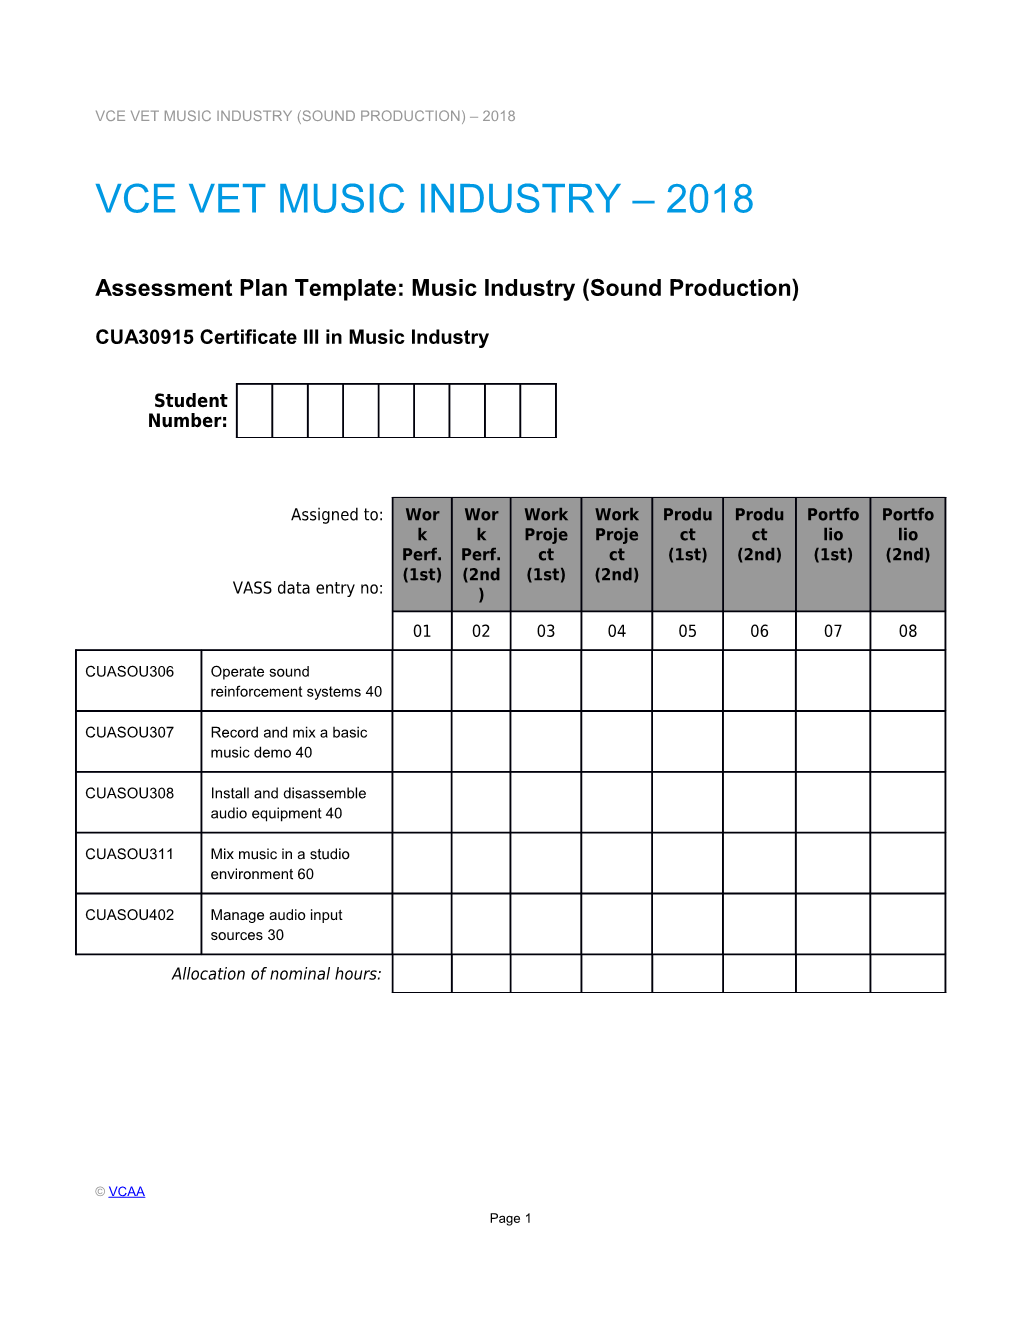 VCE VET Music Industry Sound Production - Assessment Plan Template and Sample